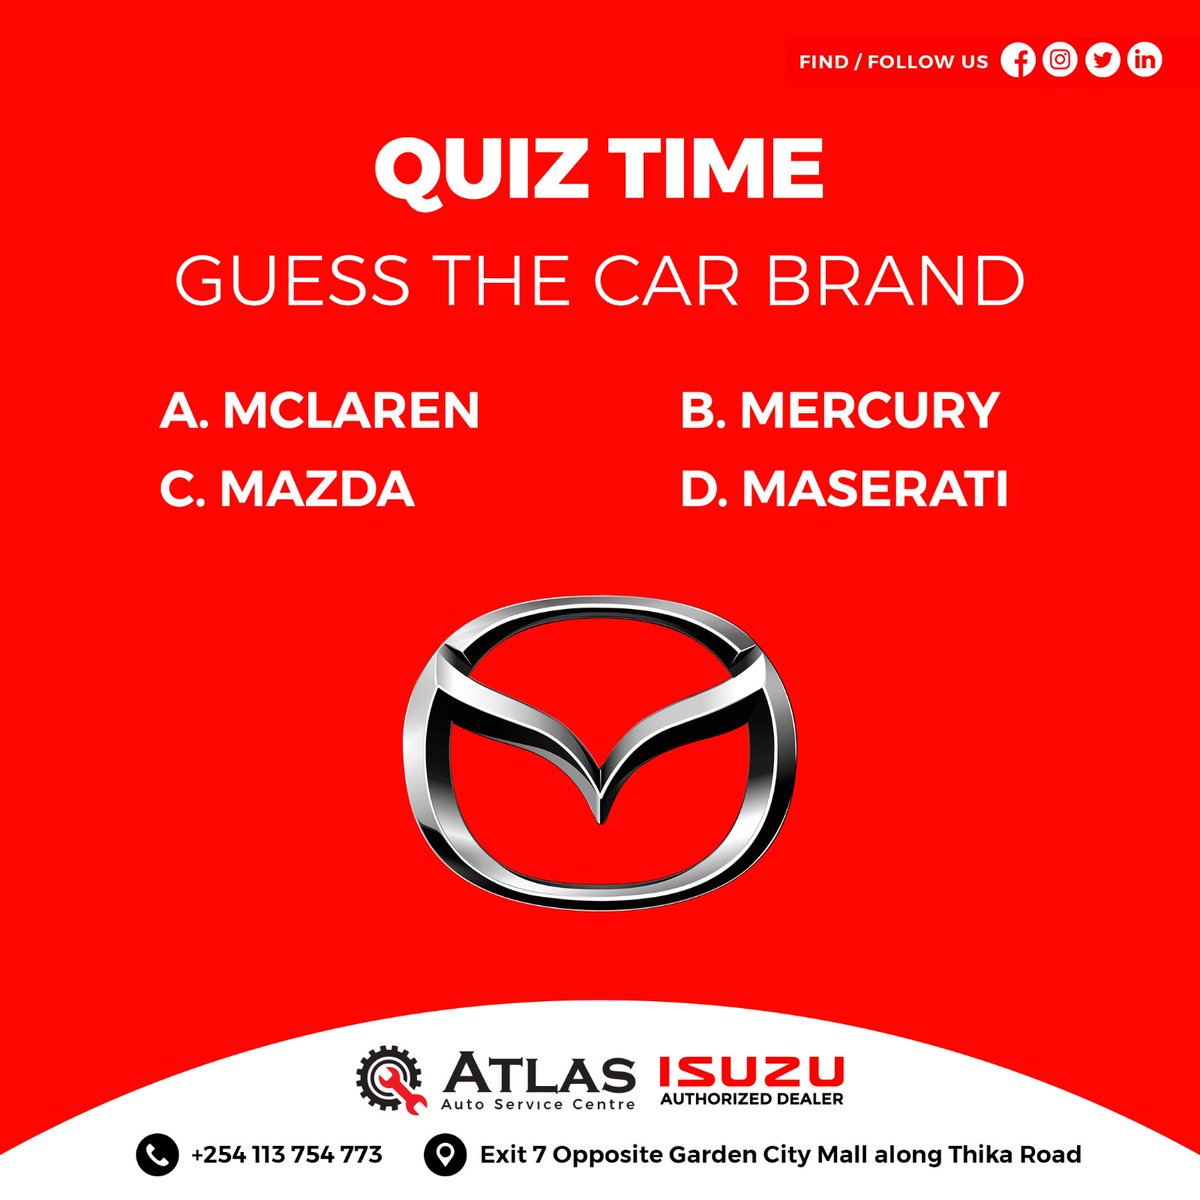 Calling all car enthusiasts!  This beauty is known for its sporty handling, stylish design, and rotary engine innovation. But what brand is it?#howcanwehelp #WhatsApp #Simps #mpesa #CarQuiz #GuessTheBrand